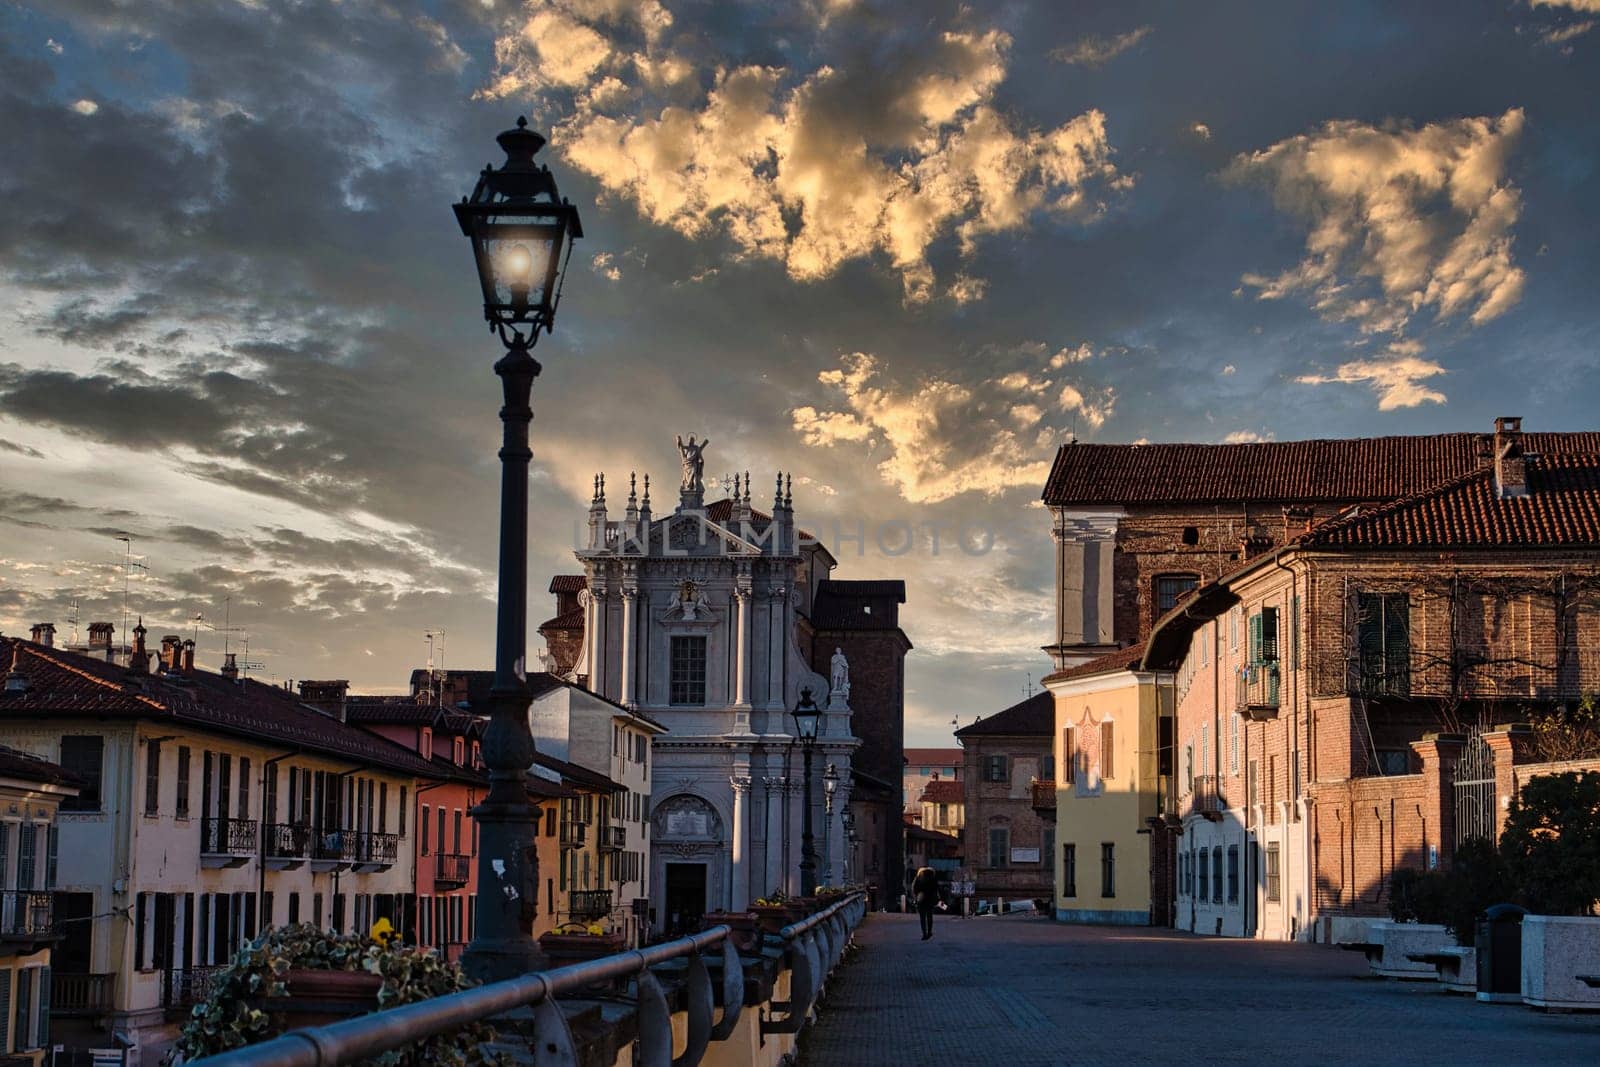 Photo of a street light illuminating a towering building in the charming town of Bra, Italy by artofphoto